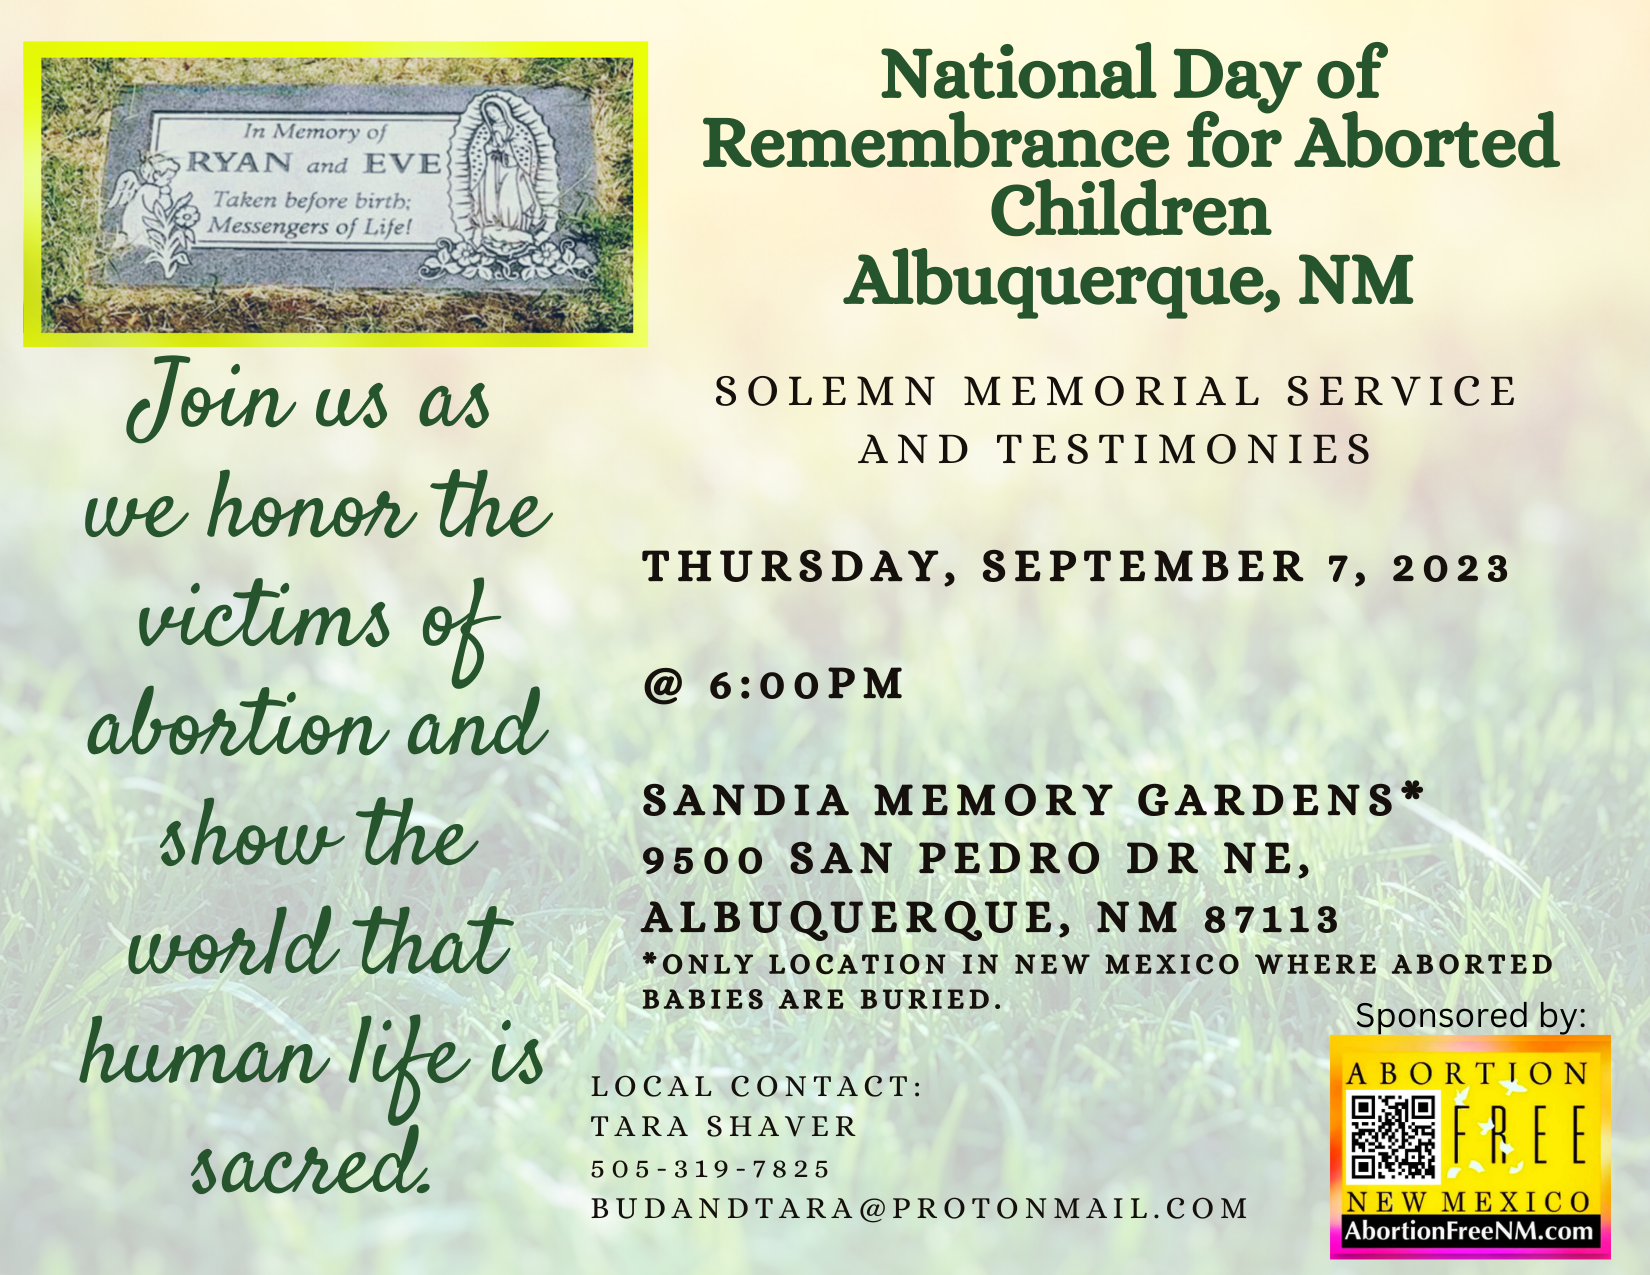 National Day of Remembrance for Aborted Children Family Life Radio